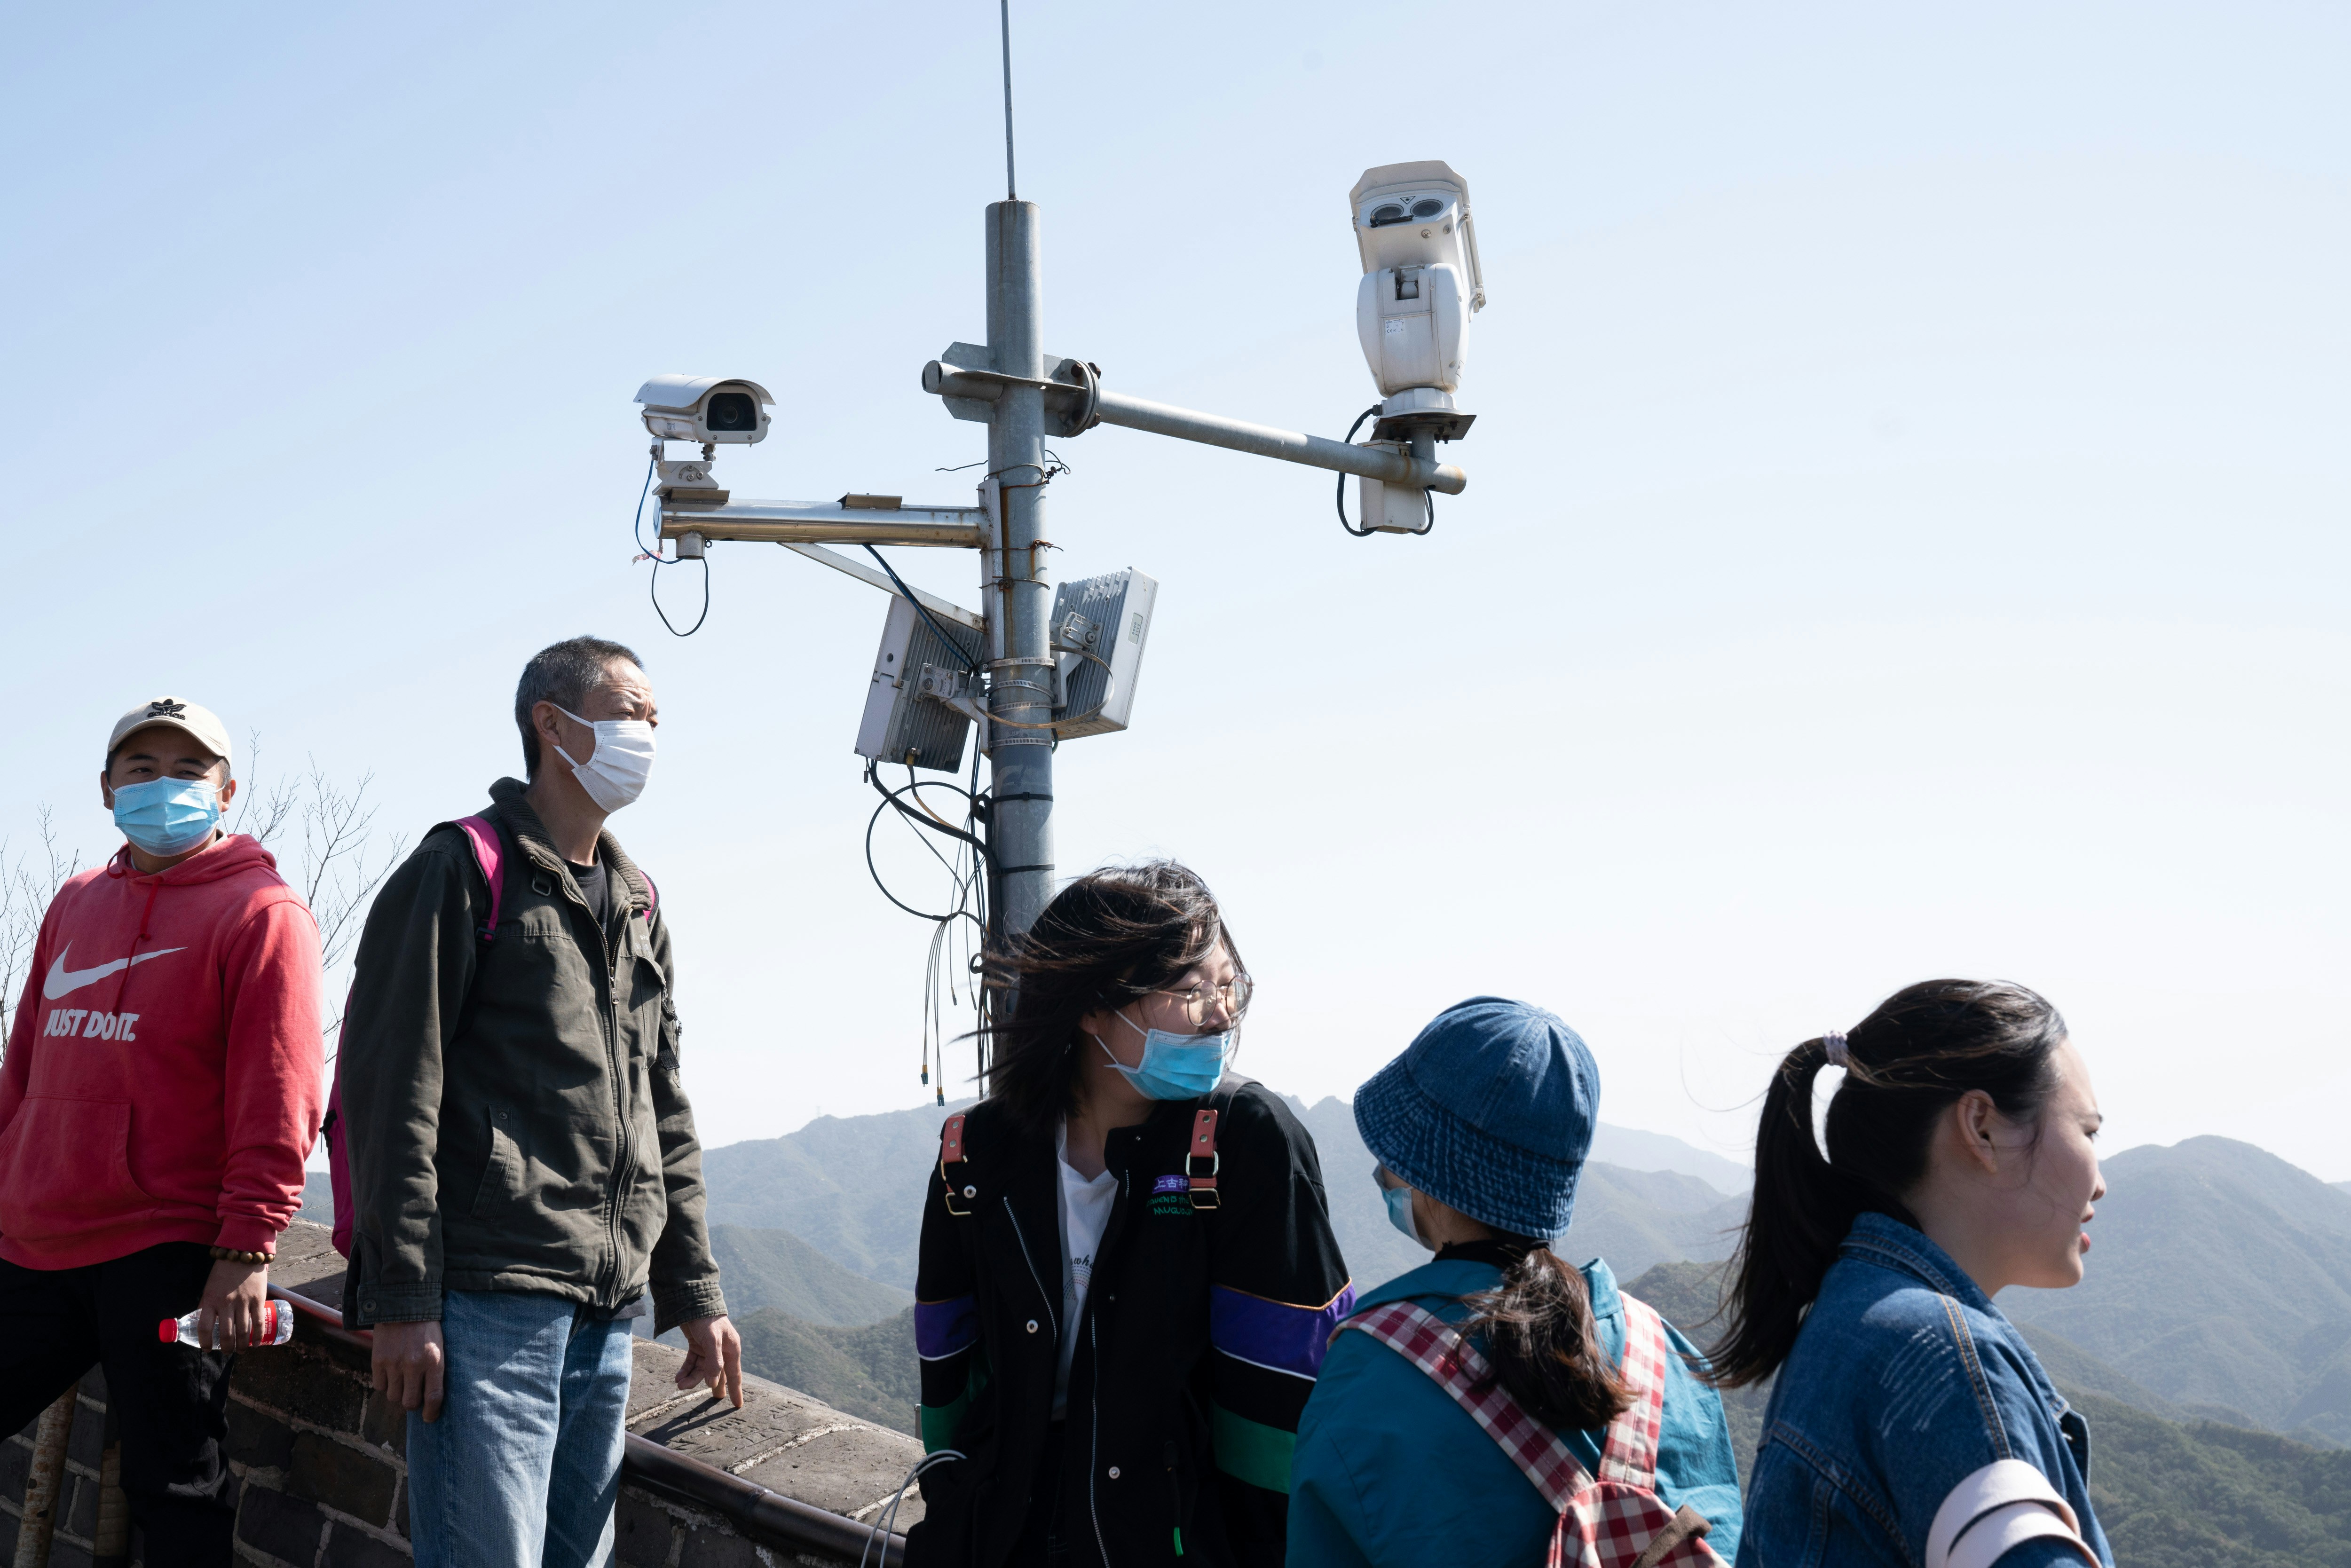 Visitors stand near surveillance cameras at the Badaling section of the Great Wall in Beijing, China, on Oct. 1, 2020.